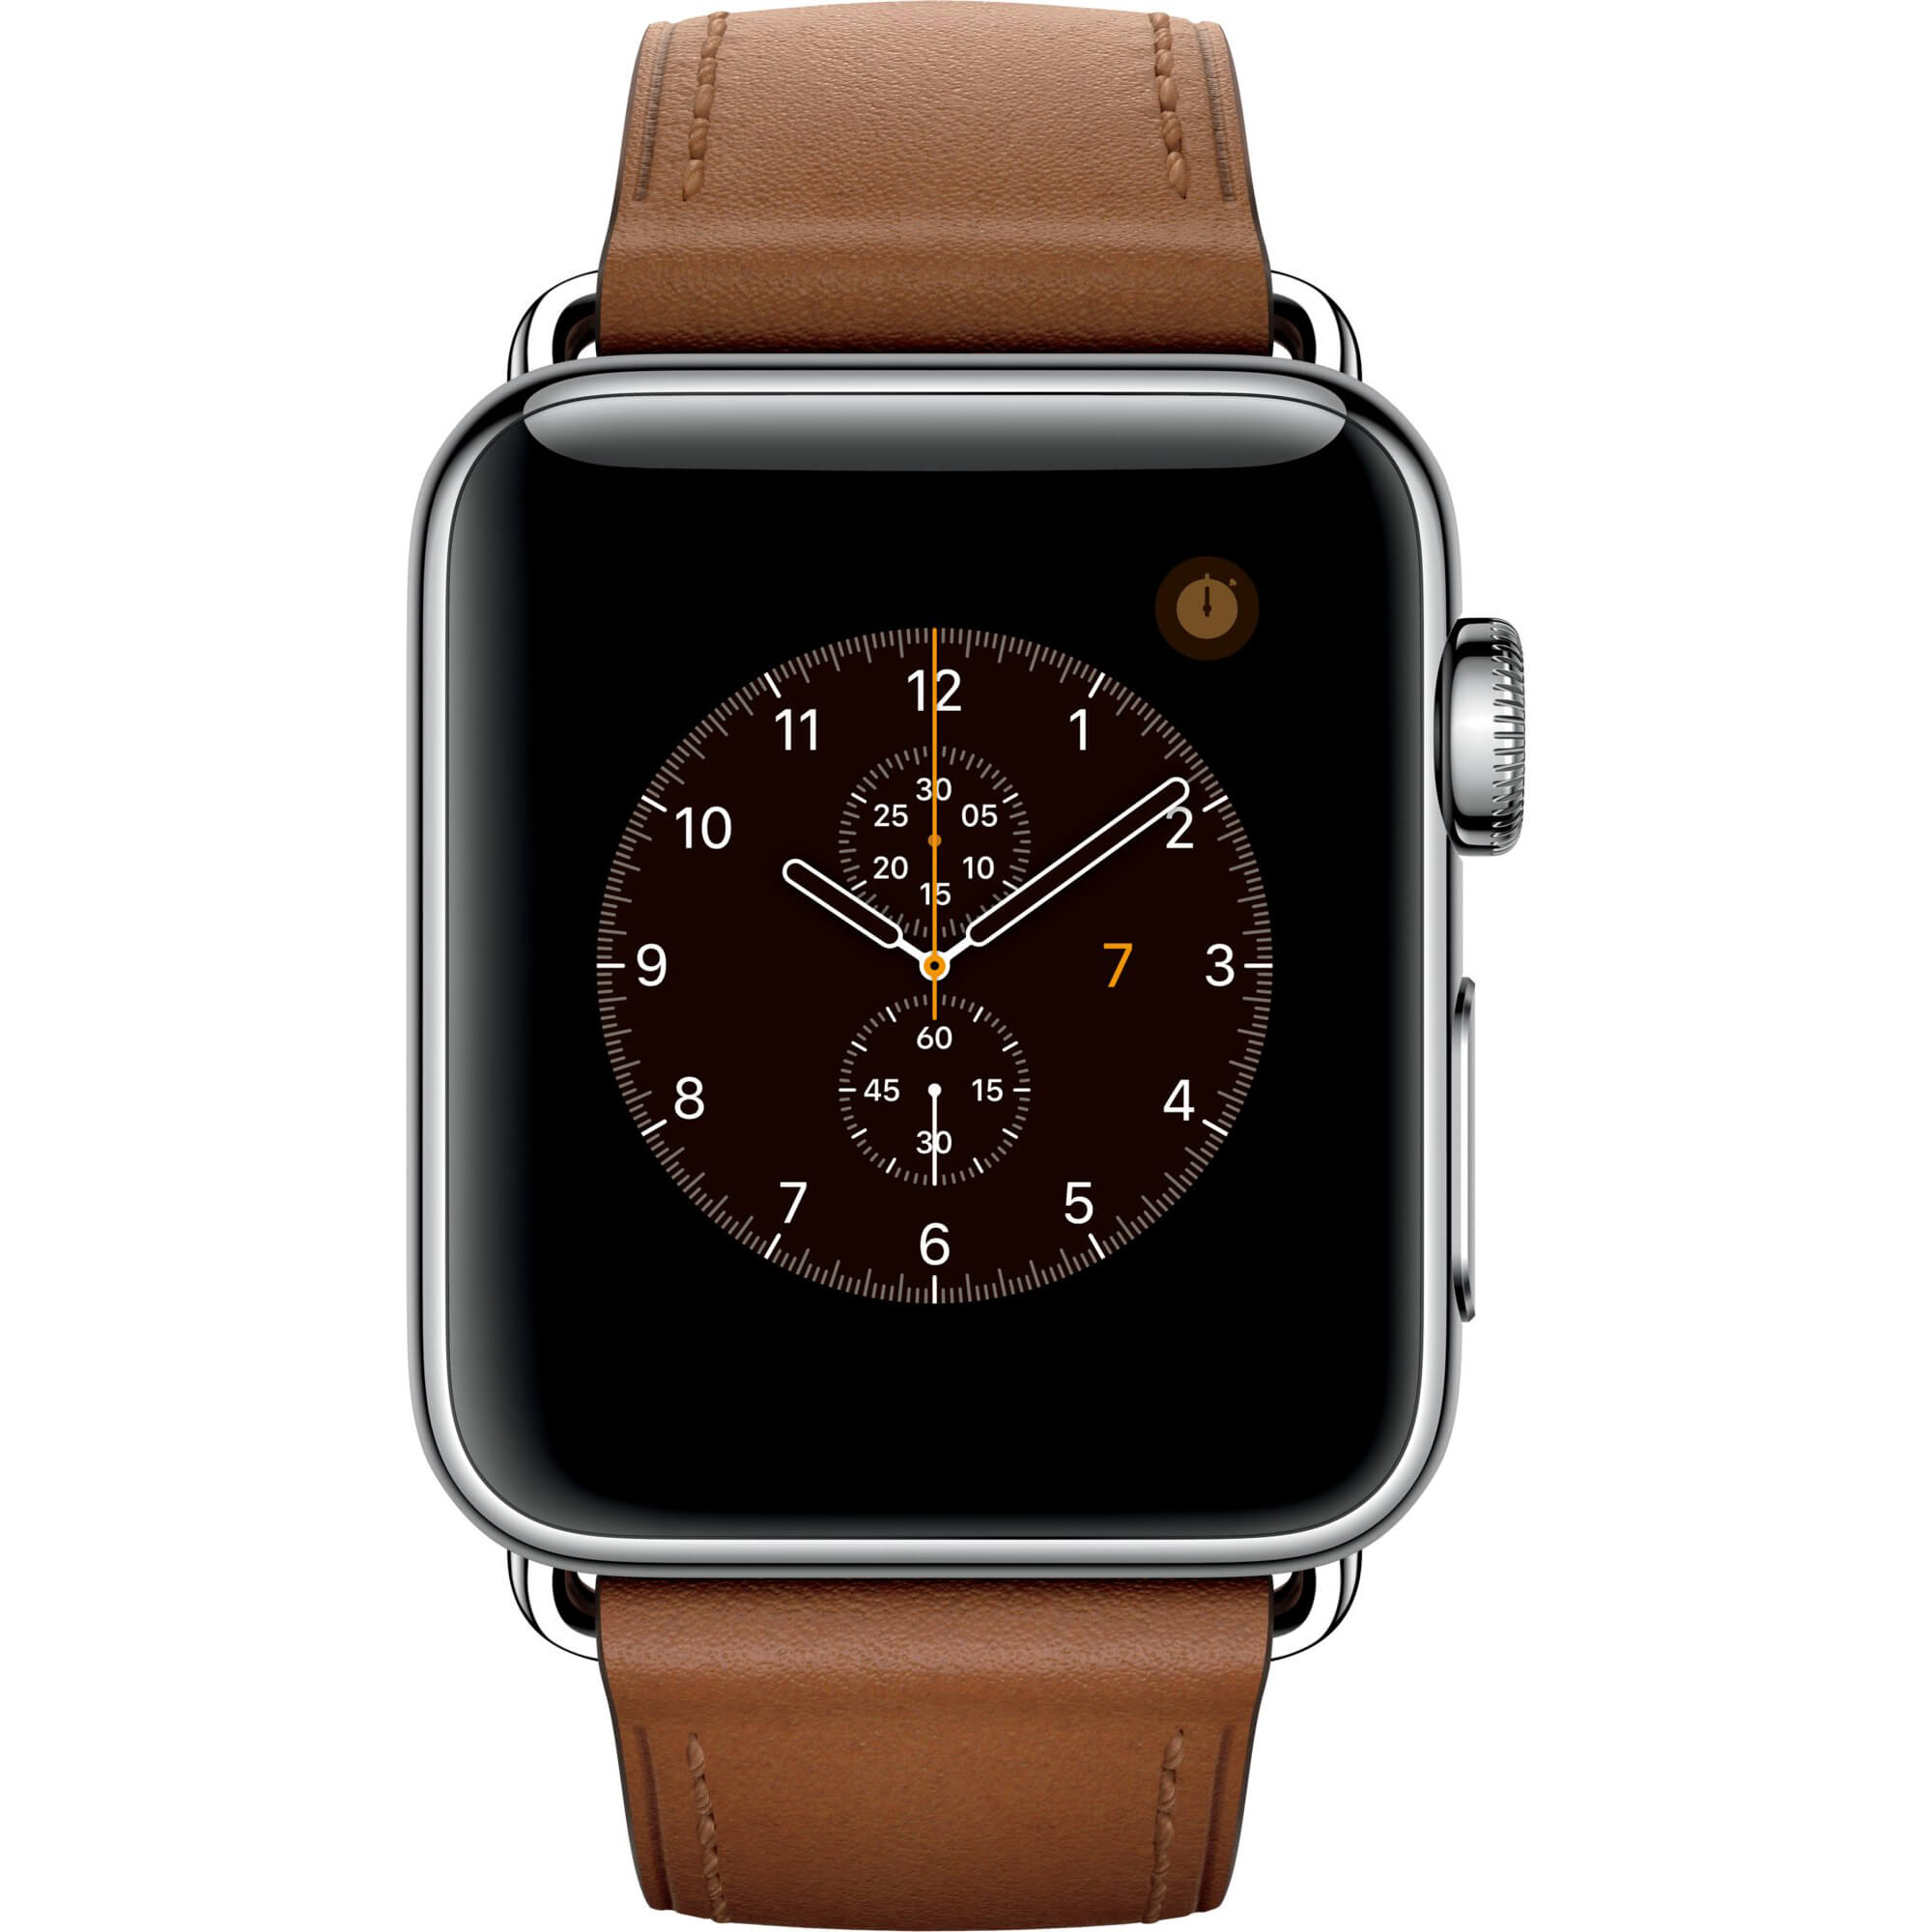  Apple Watch 2 38mm Stainless Steel Case, Saddle Brown Classic Buckle 